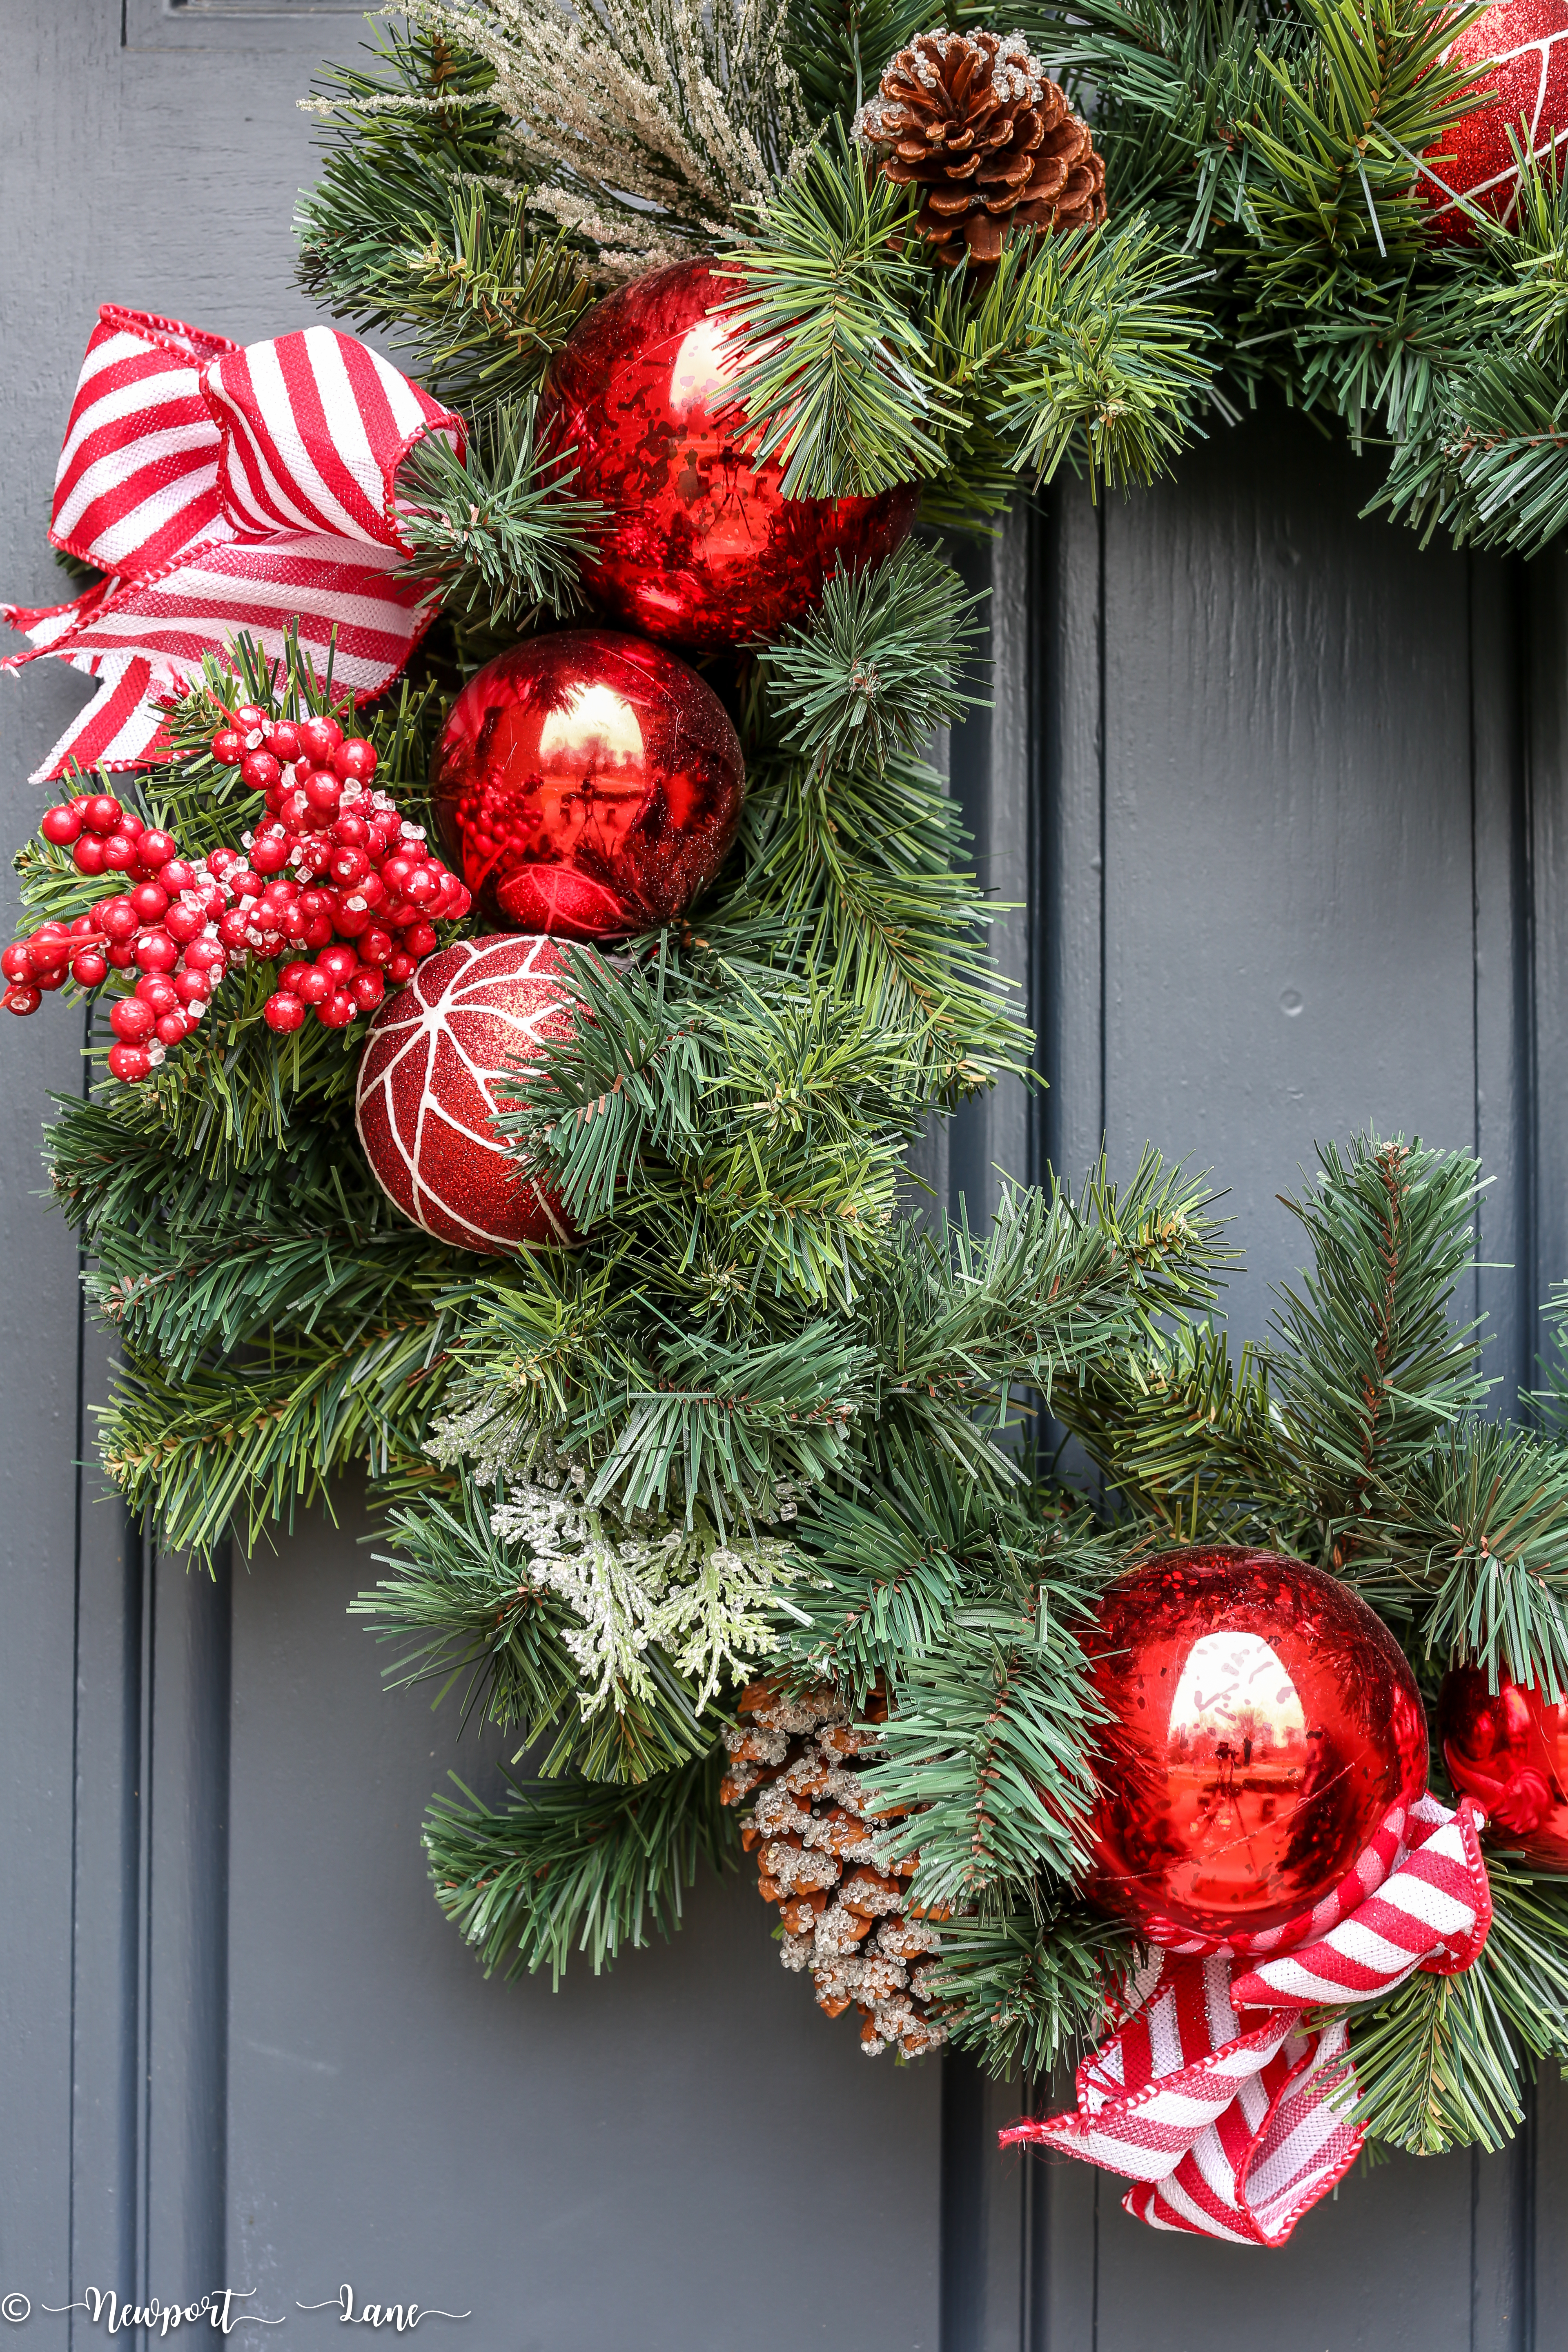 Christmas front porch decor. Red and green decorations. Red lanterns. #Christmasfrontporch #Christmasdecor #holidaydecor